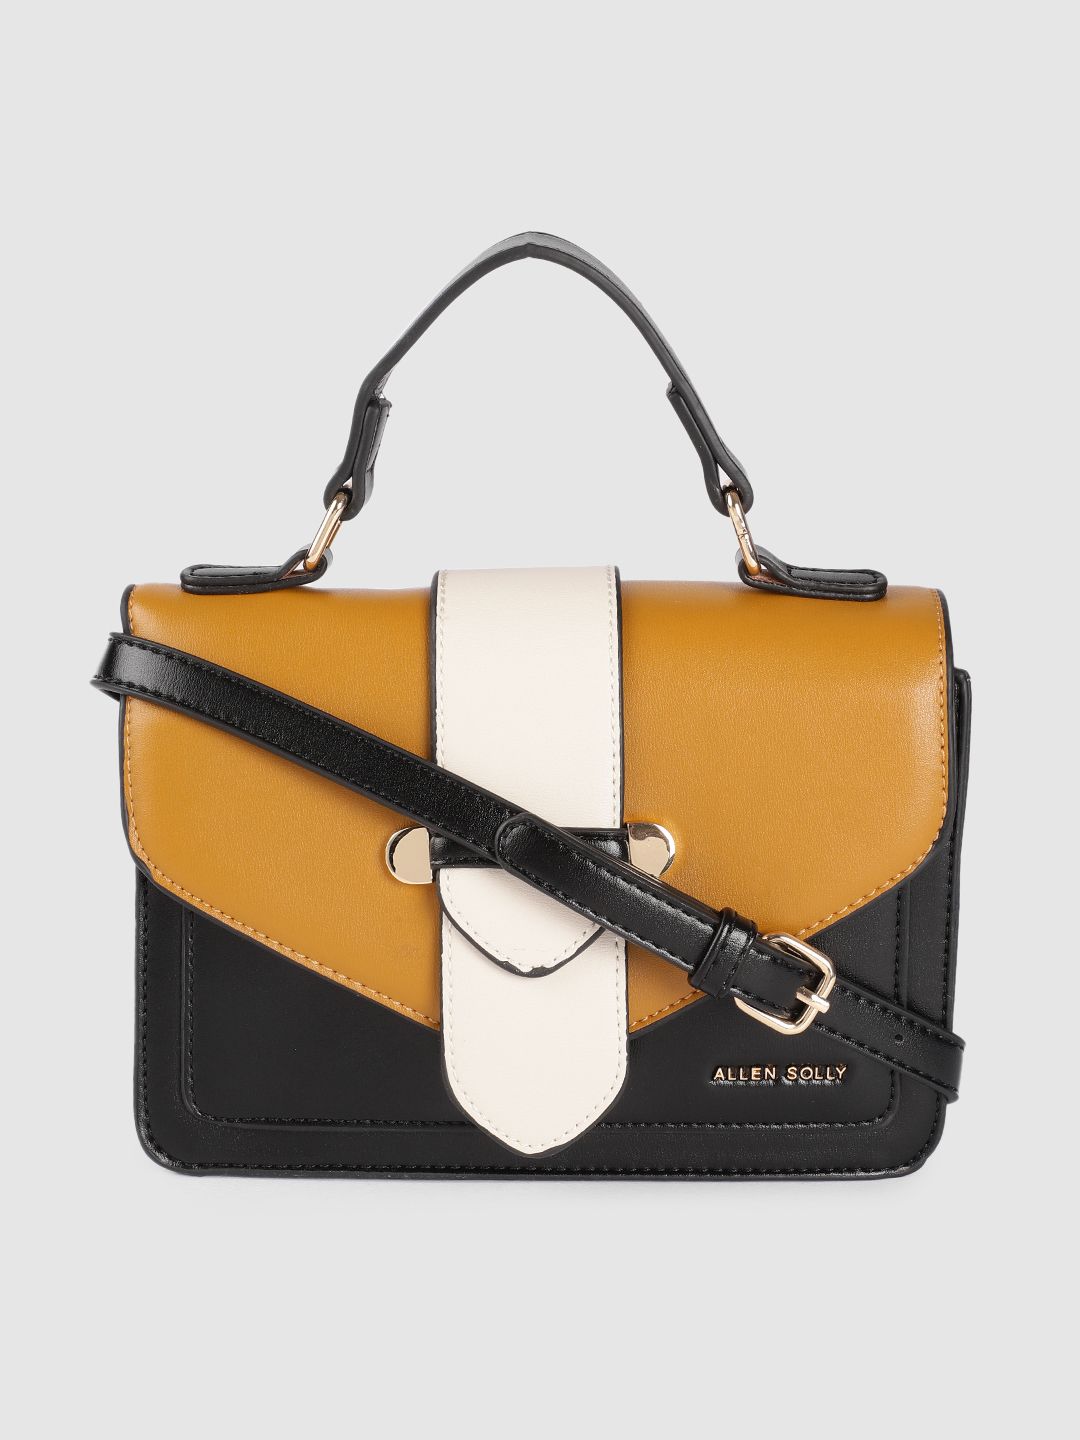 Allen Solly Black Colourblocked PU Structured Satchel Price in India